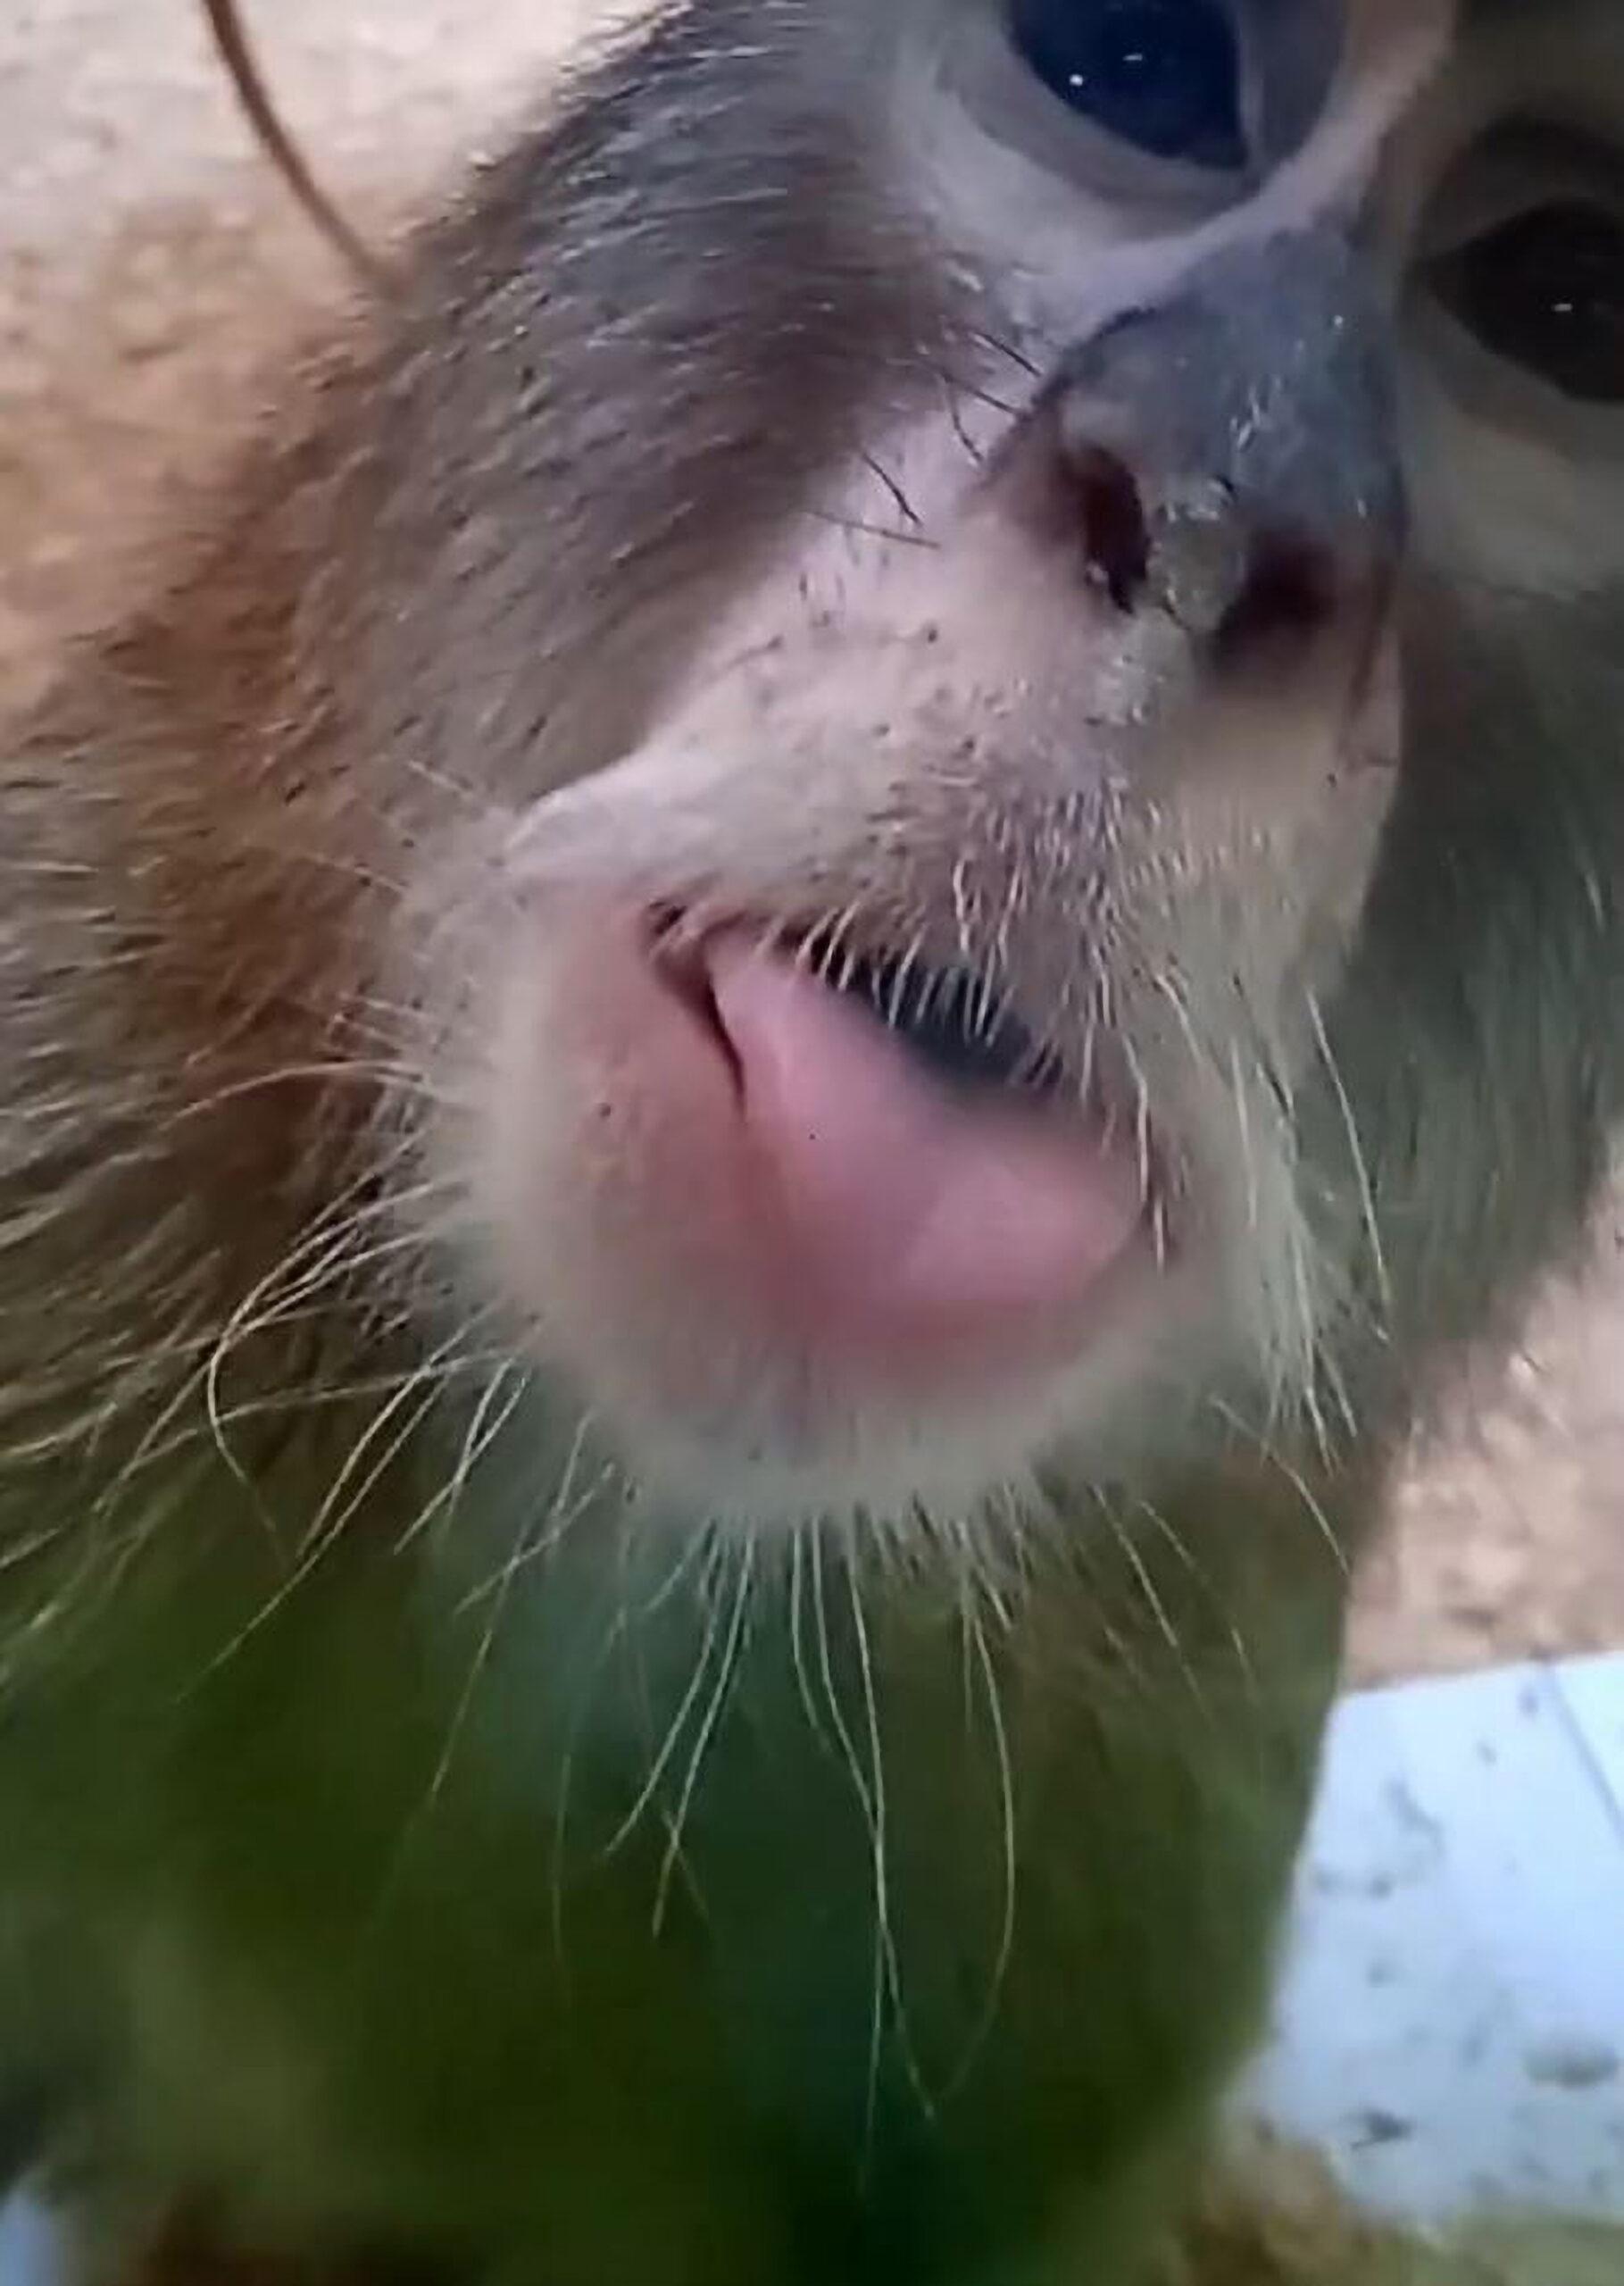 Read more about the article Cheeky Monkey Sticks Out Tongue At Camera That Had Been Recording Its Roomie